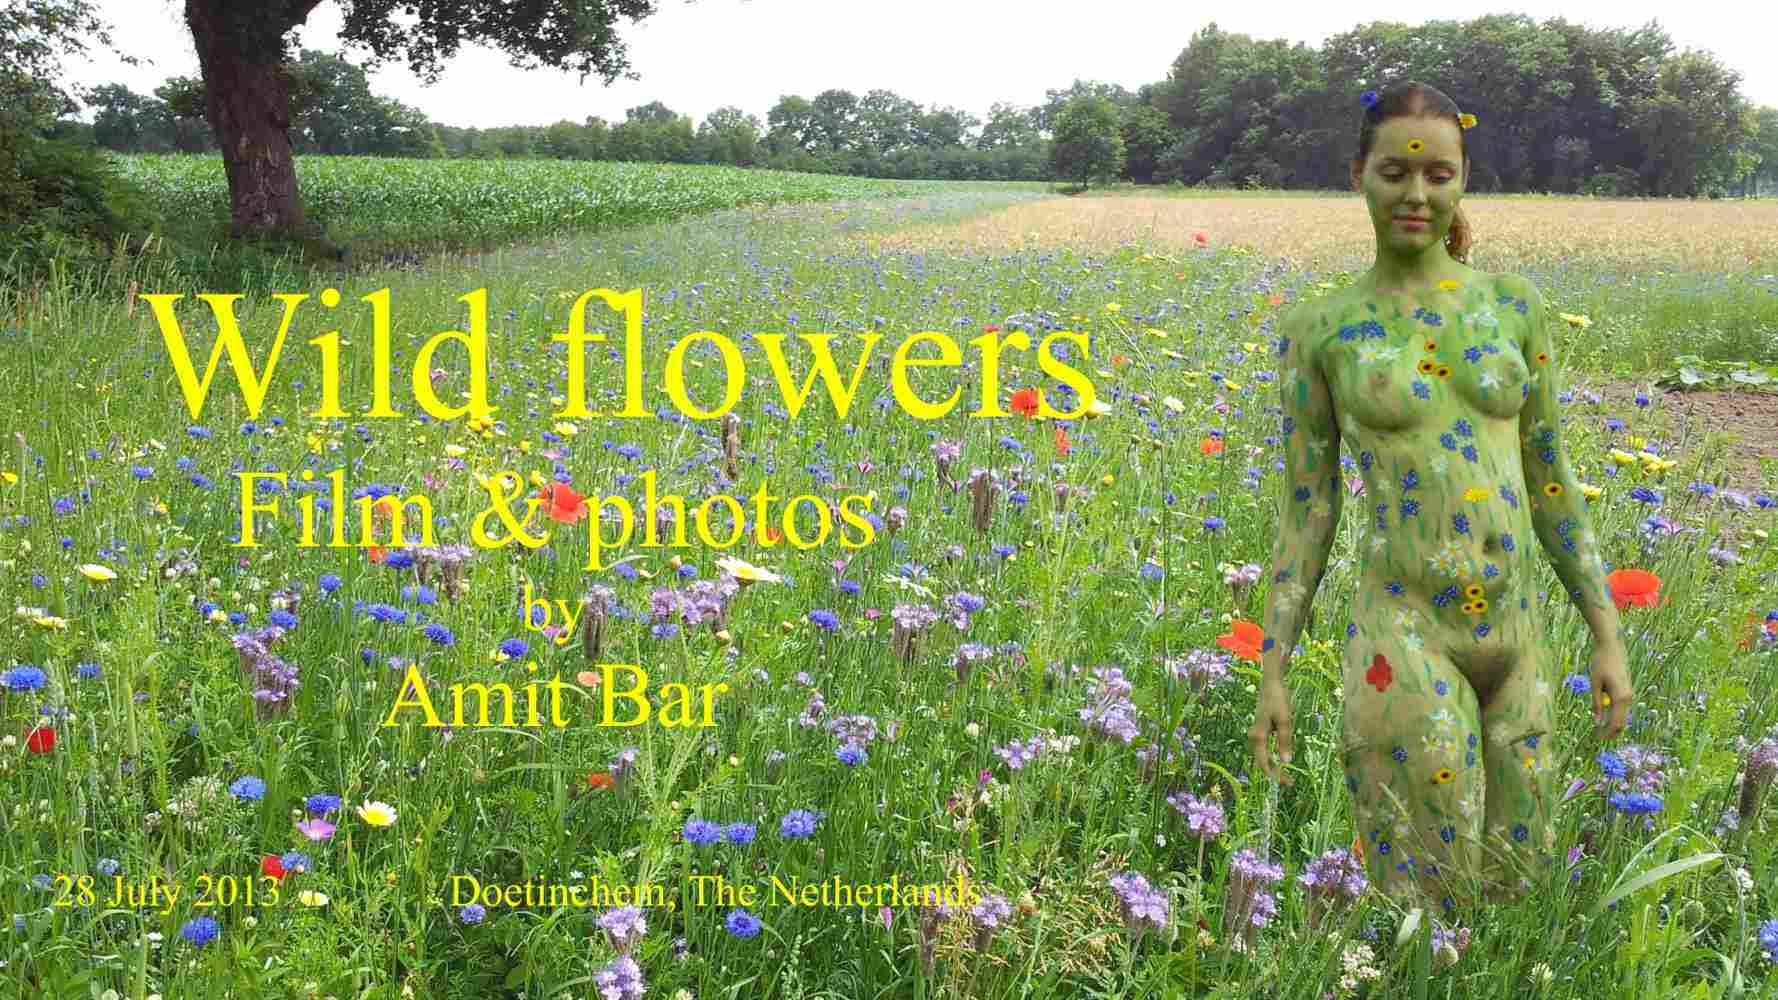 Wild flowers video: Body-painted woman with wild flowers